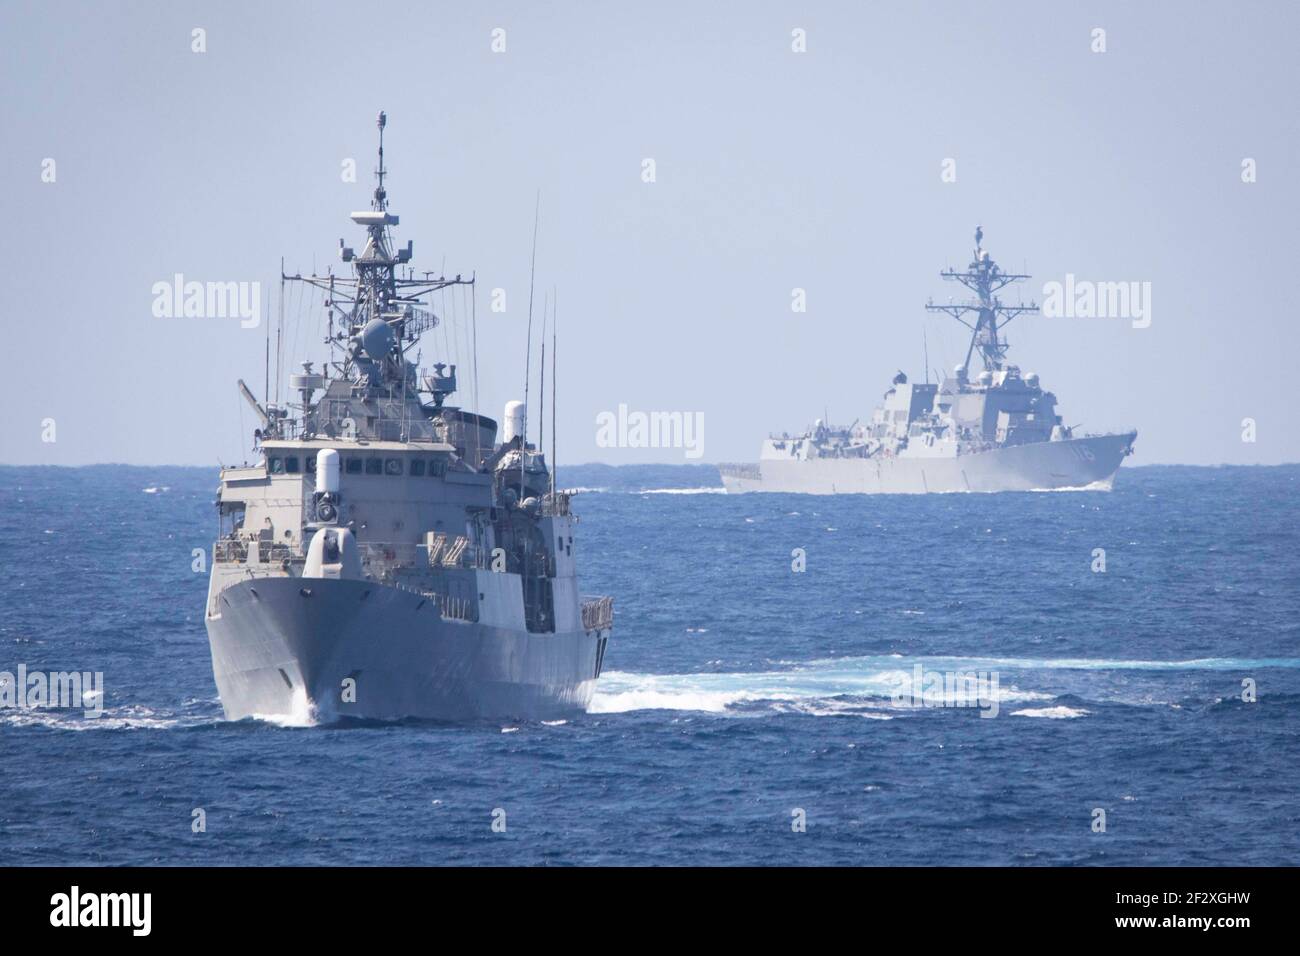 The Greek Navy Hydra-class frigate HS Psaraa, left, and the U.S. Navy Arleigh-Burke class guided-missile destroyer USS Thomas Hudner transits the Mediterranean Sea in formation with the Eisenhower Carrier Strike Group March 12, 2021 in the Mediterranean Sea. Stock Photo